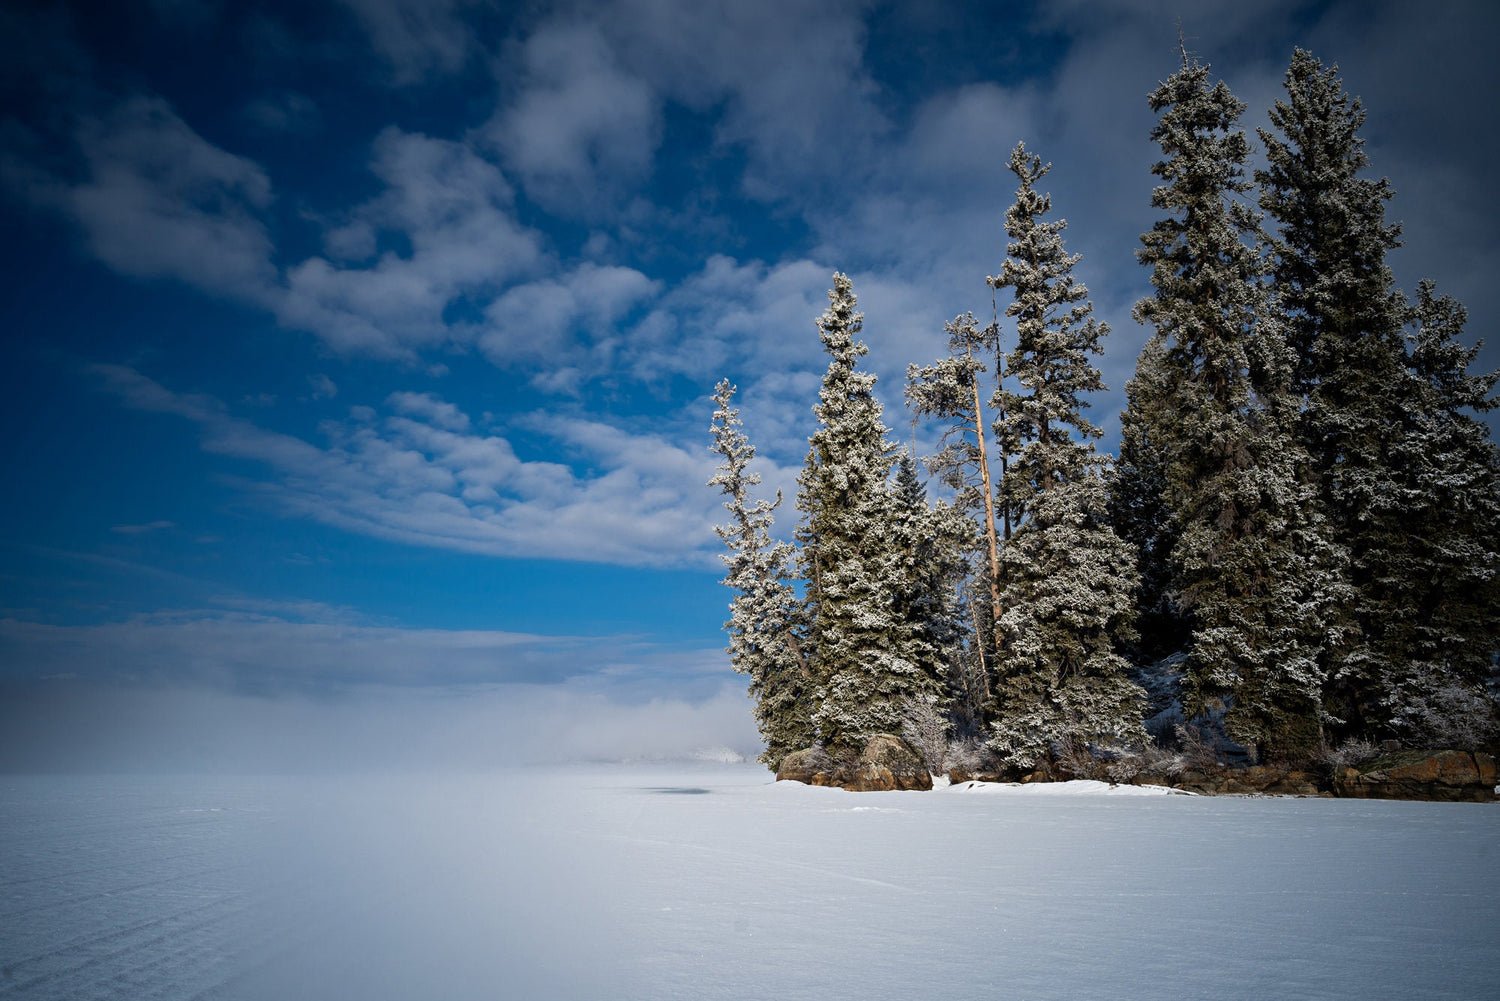 Wyoming Winter Landscape. - The Overland Diaries